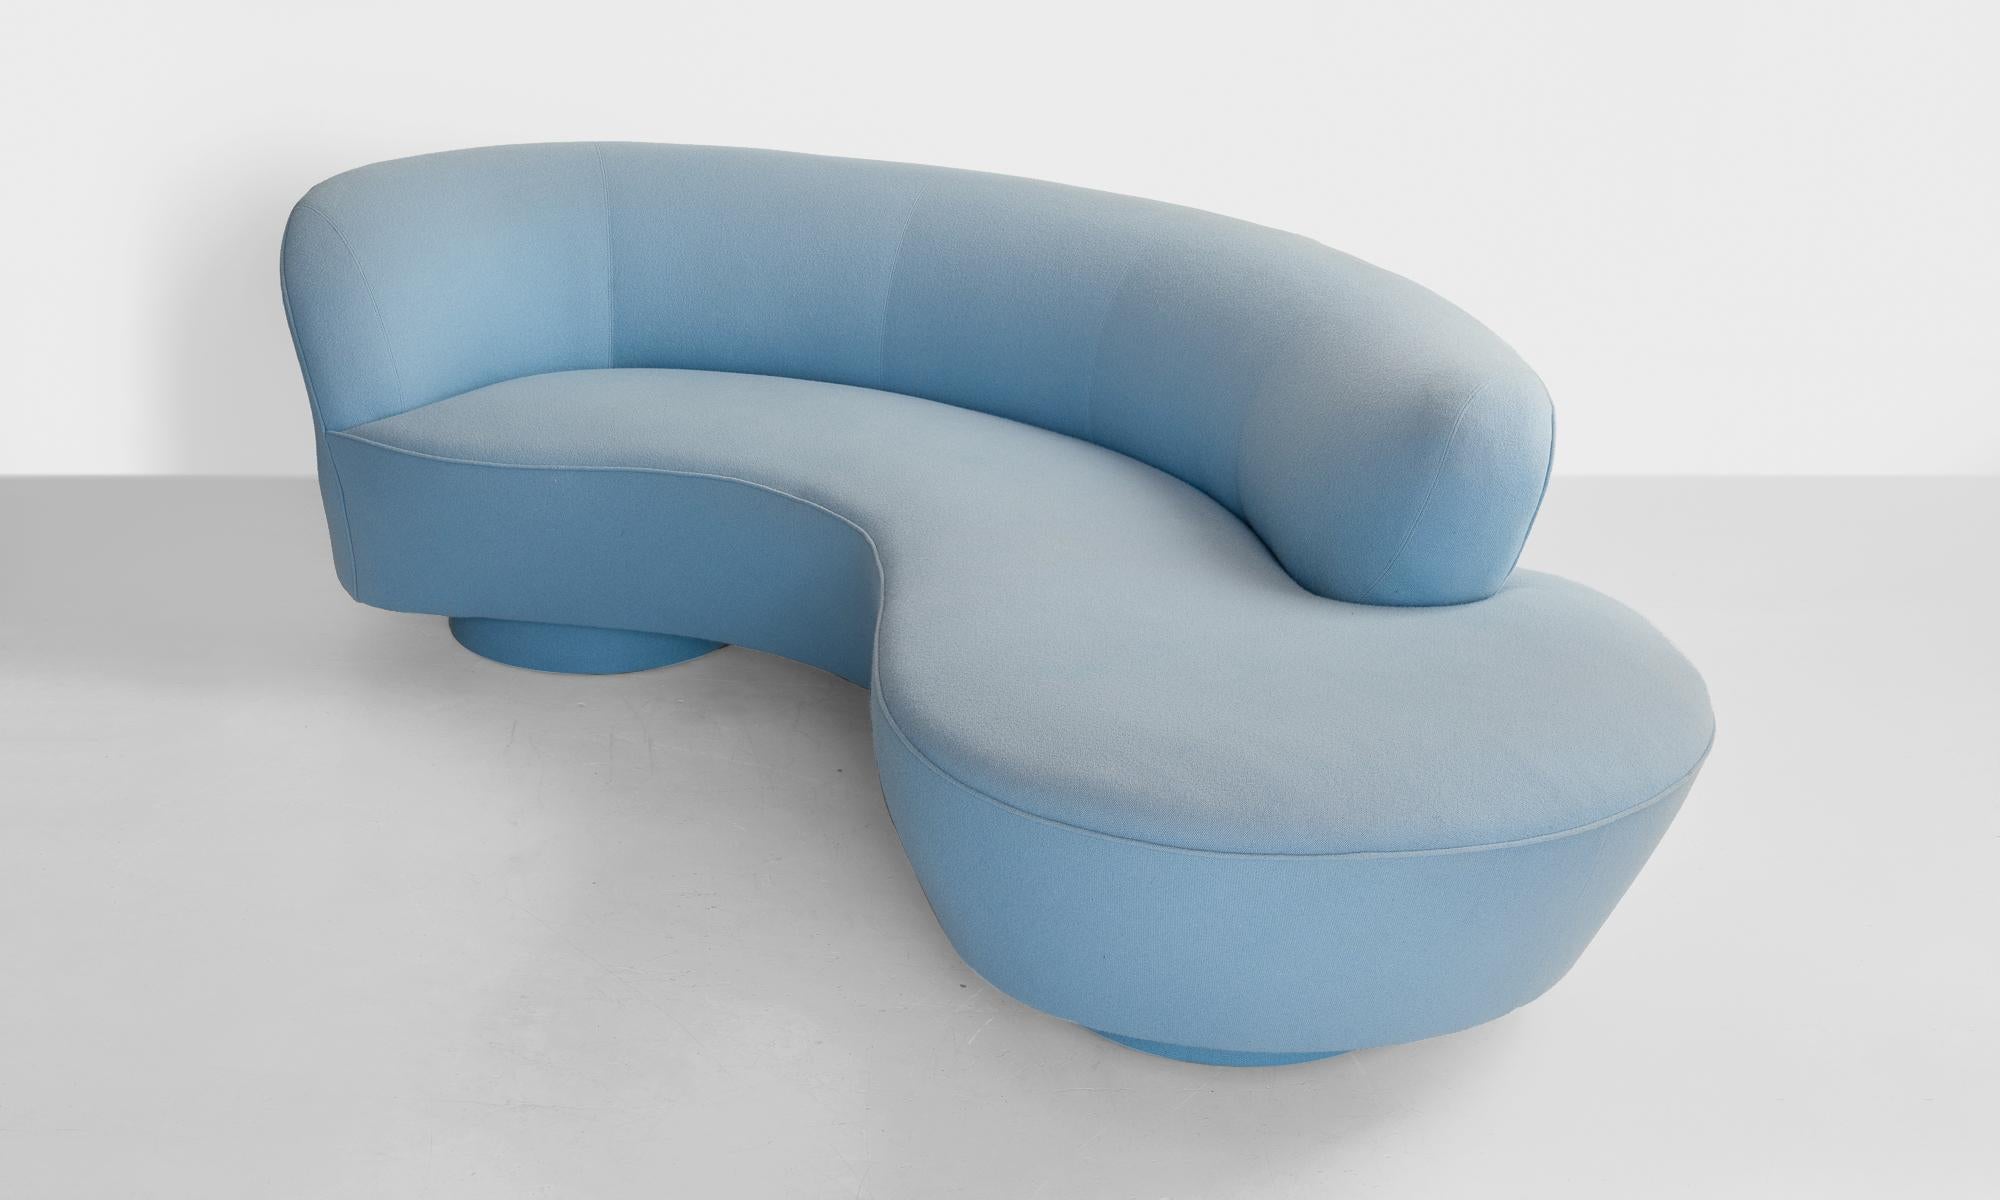 Iconic serpentine sofa designed by Vladimir Kagan. Reupholstered in wool fabric by Maharam.